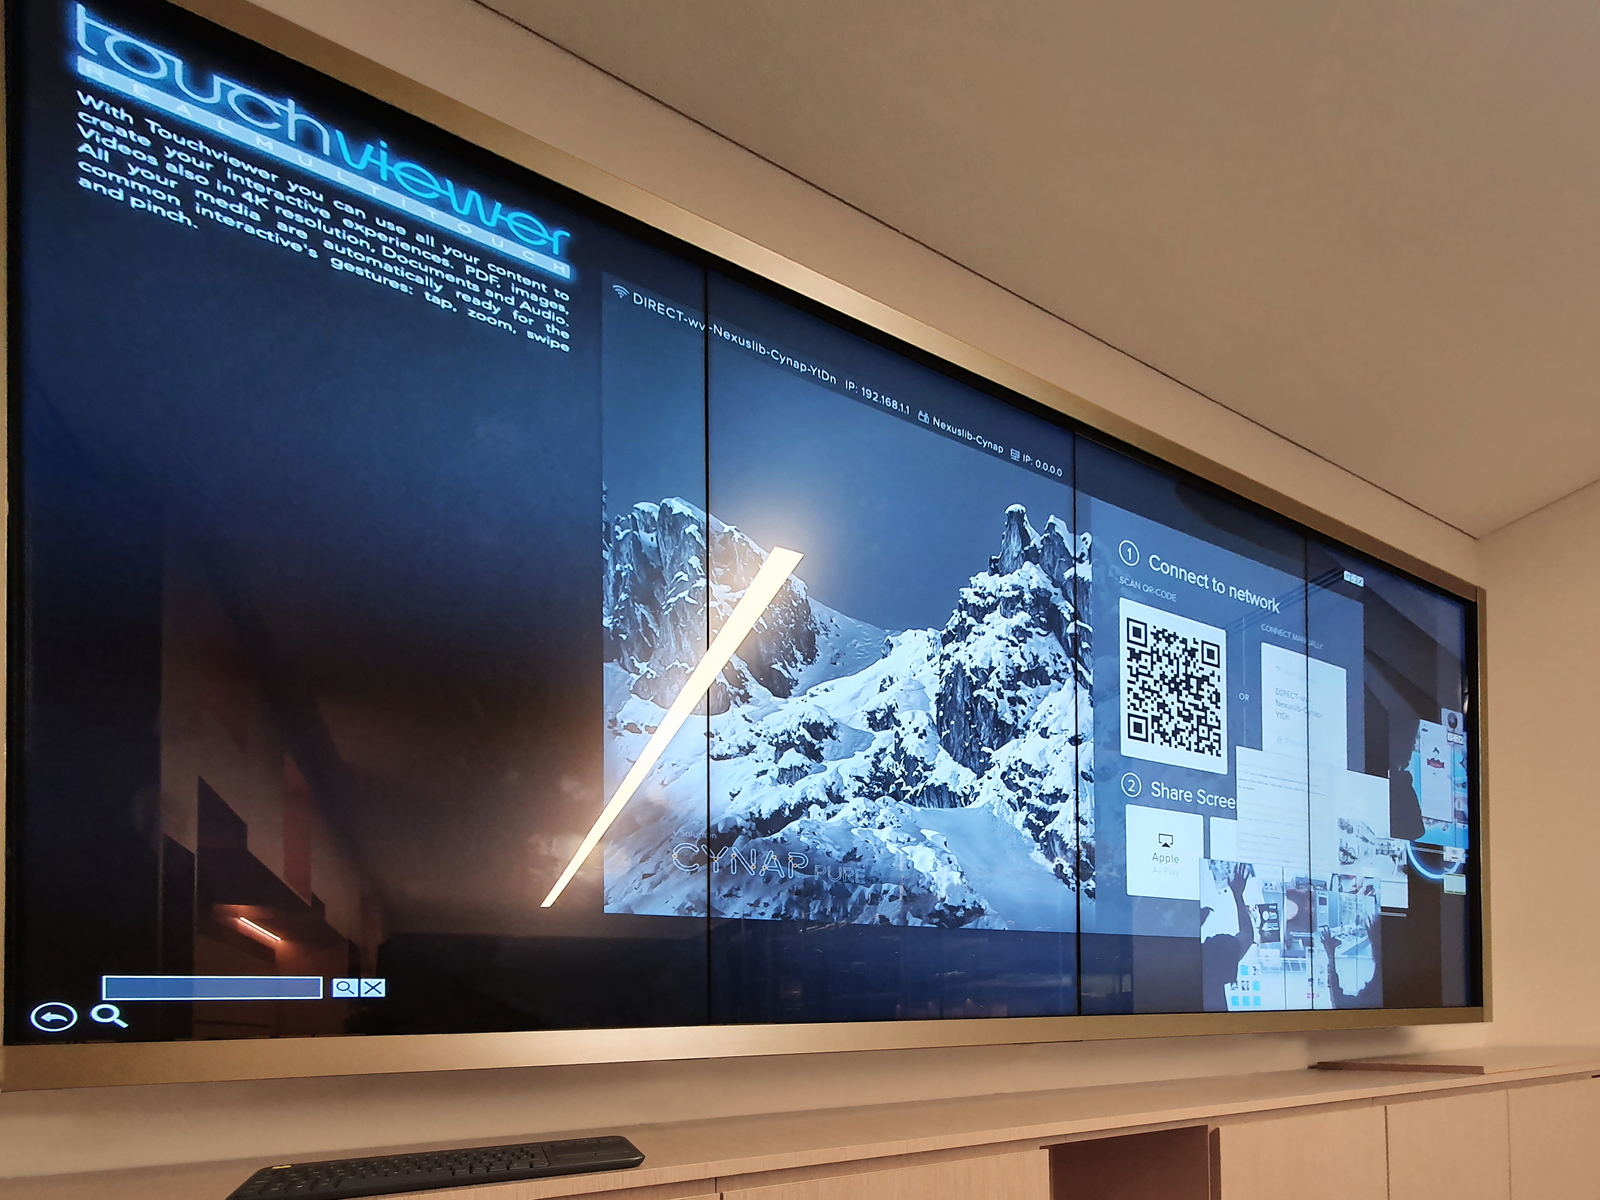 Touchwindow - The library becoming interactive